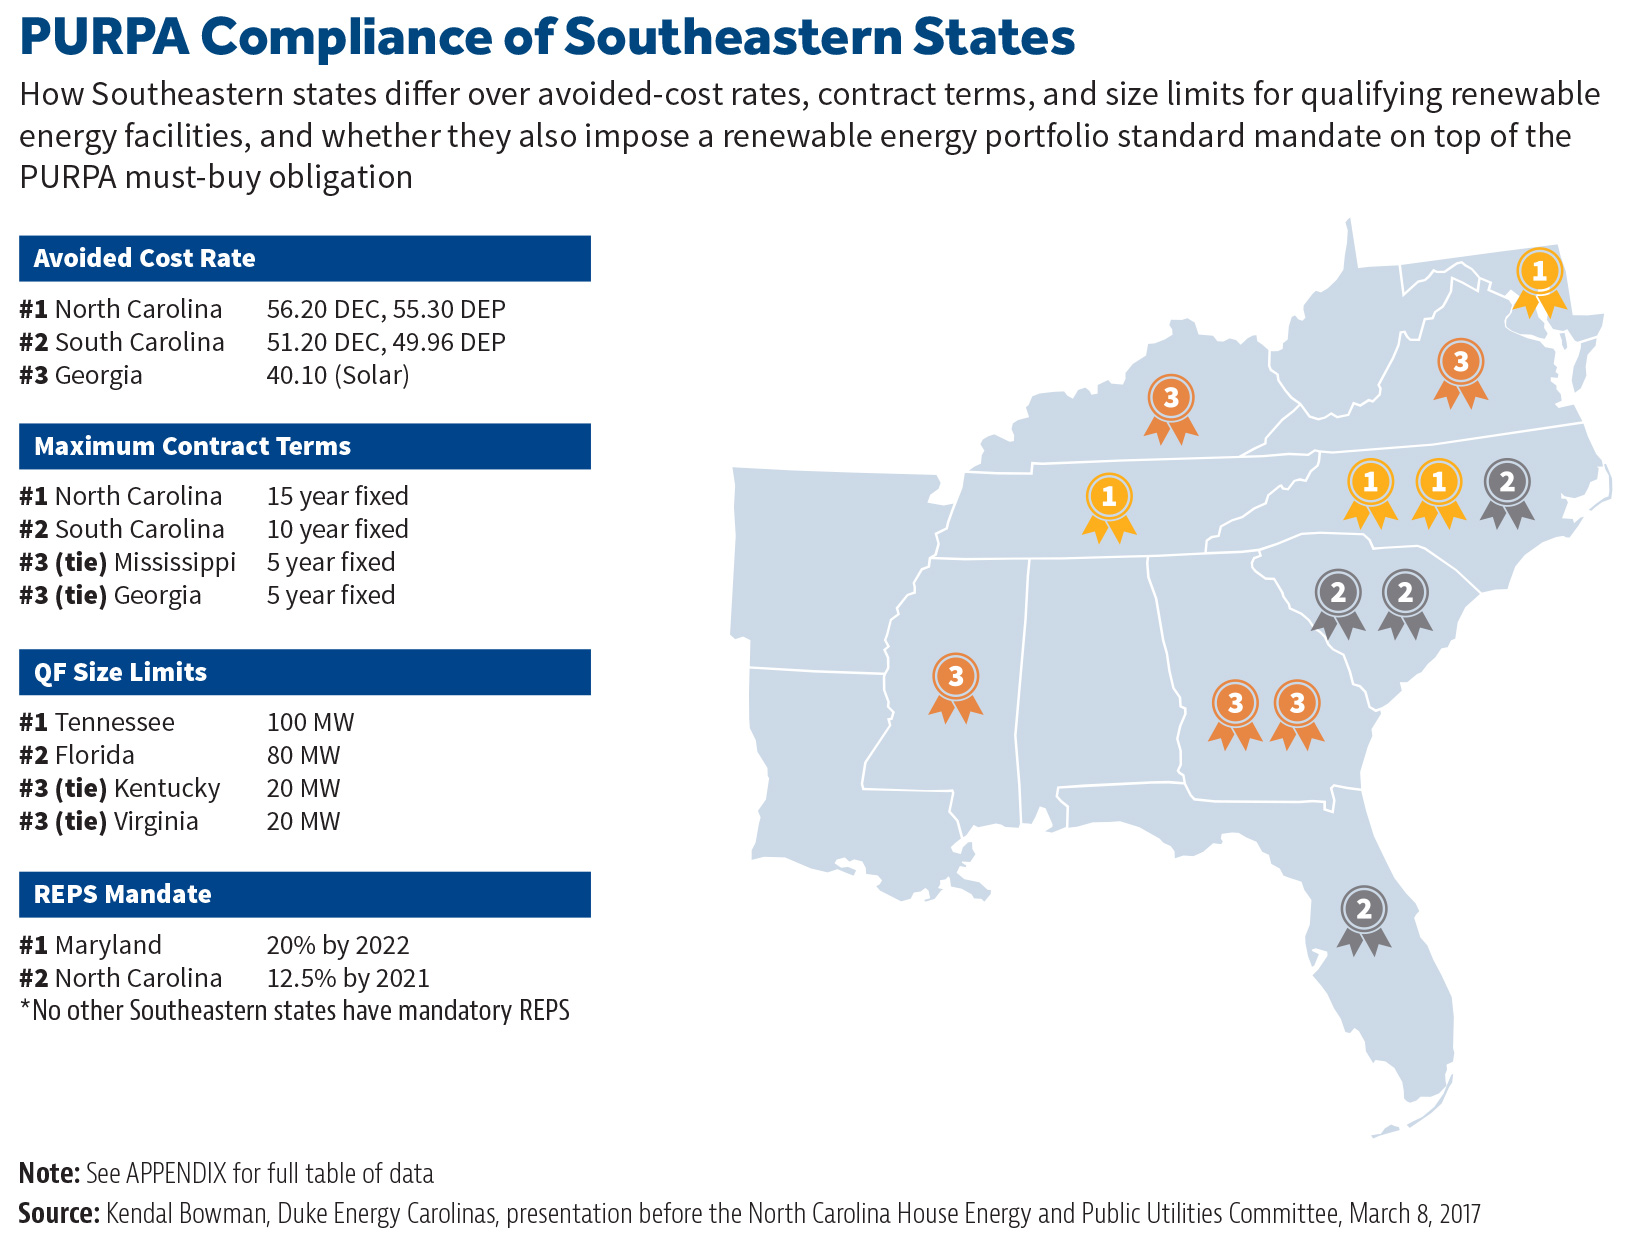 PURPA Compliance of Southeastern States